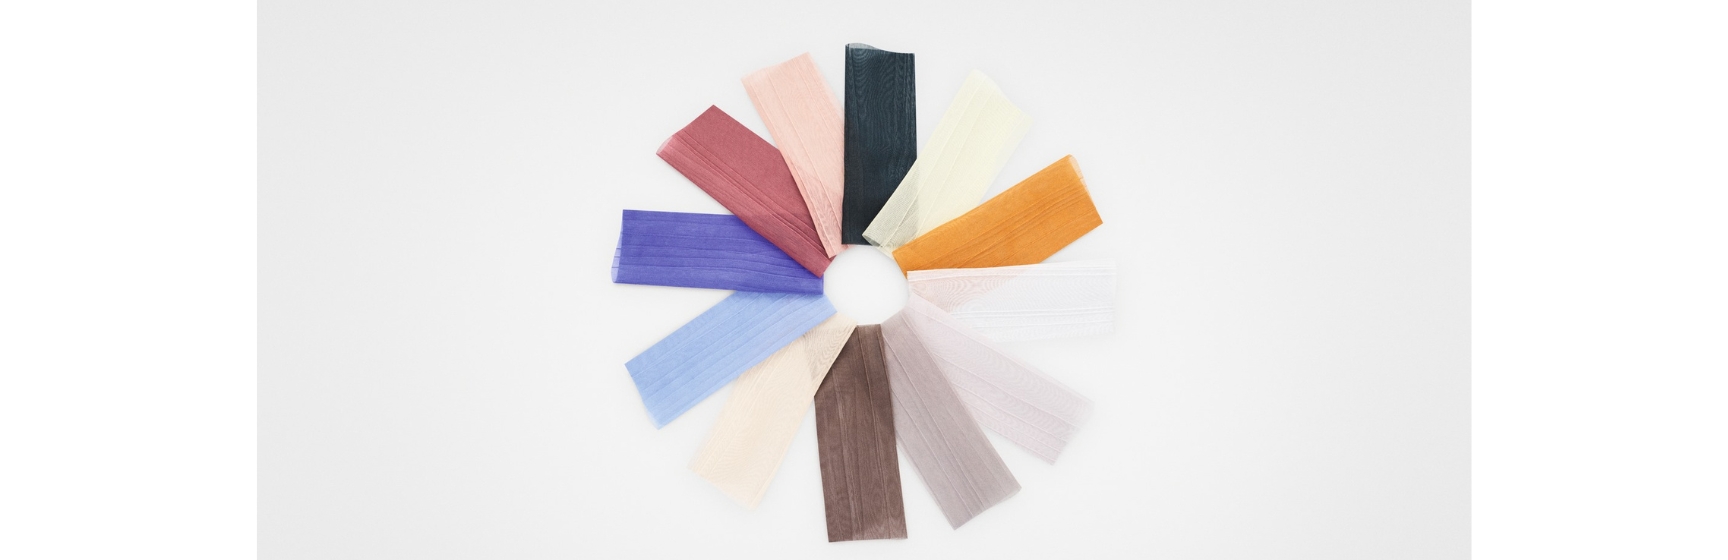 Kvadrat uses Delogue PLM to maintain strict CSR policies